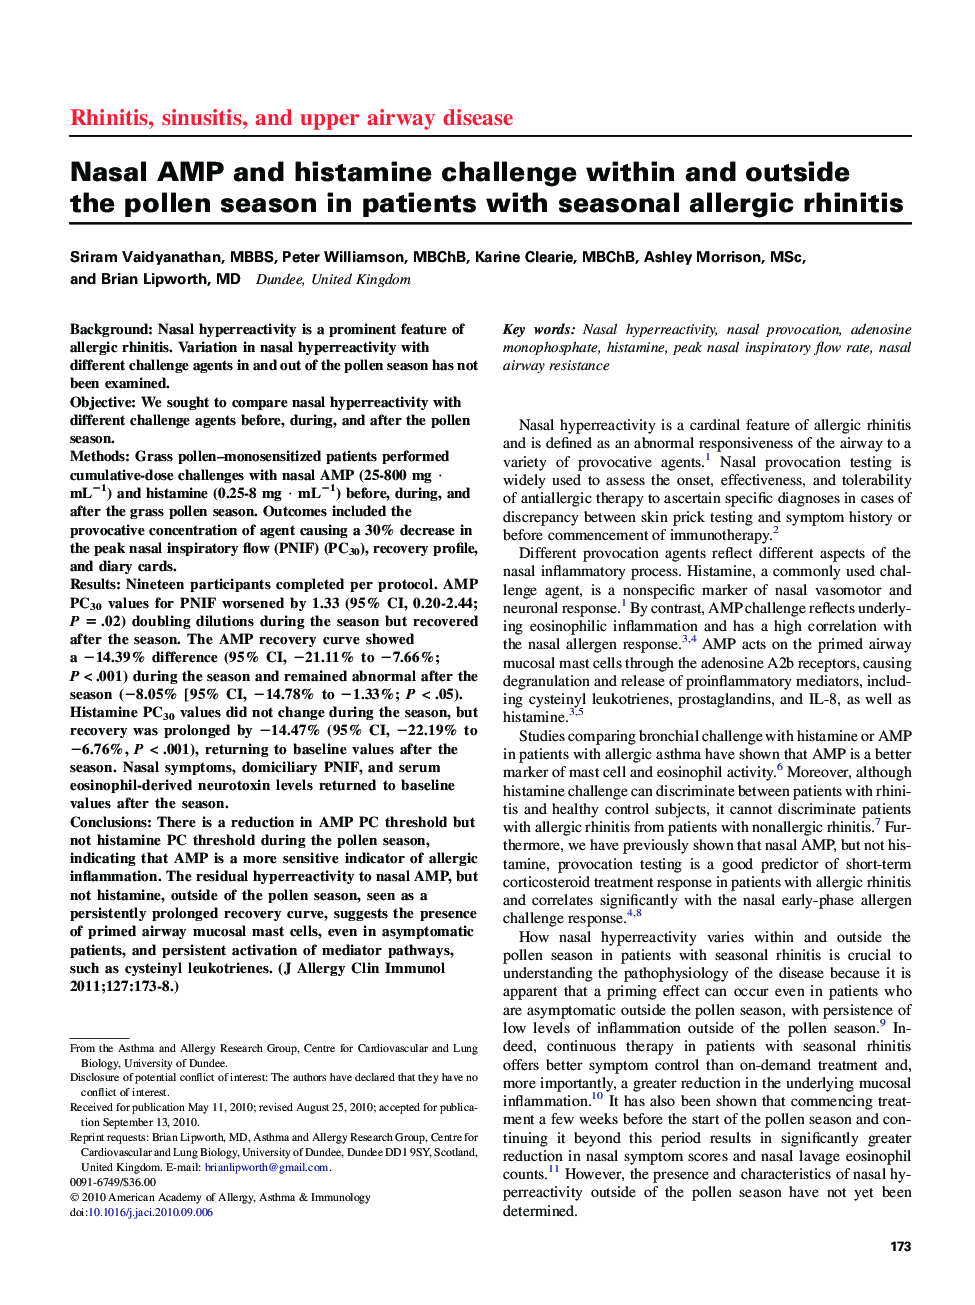 Nasal AMP and histamine challenge within and outside theÂ pollen season in patients with seasonal allergic rhinitis